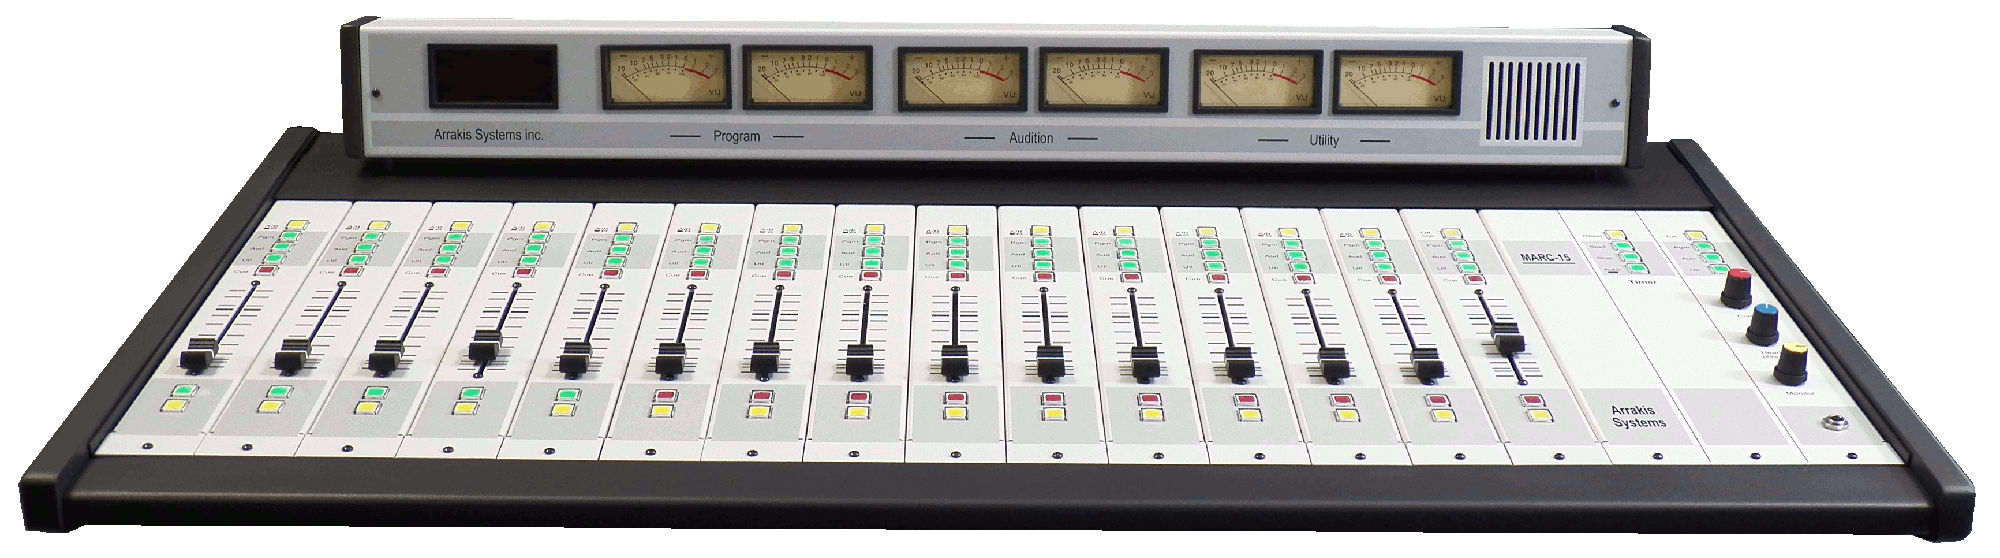 The MARC-15 is a powerful and flexible broadcast radio console. Effective for large studios and groups. 